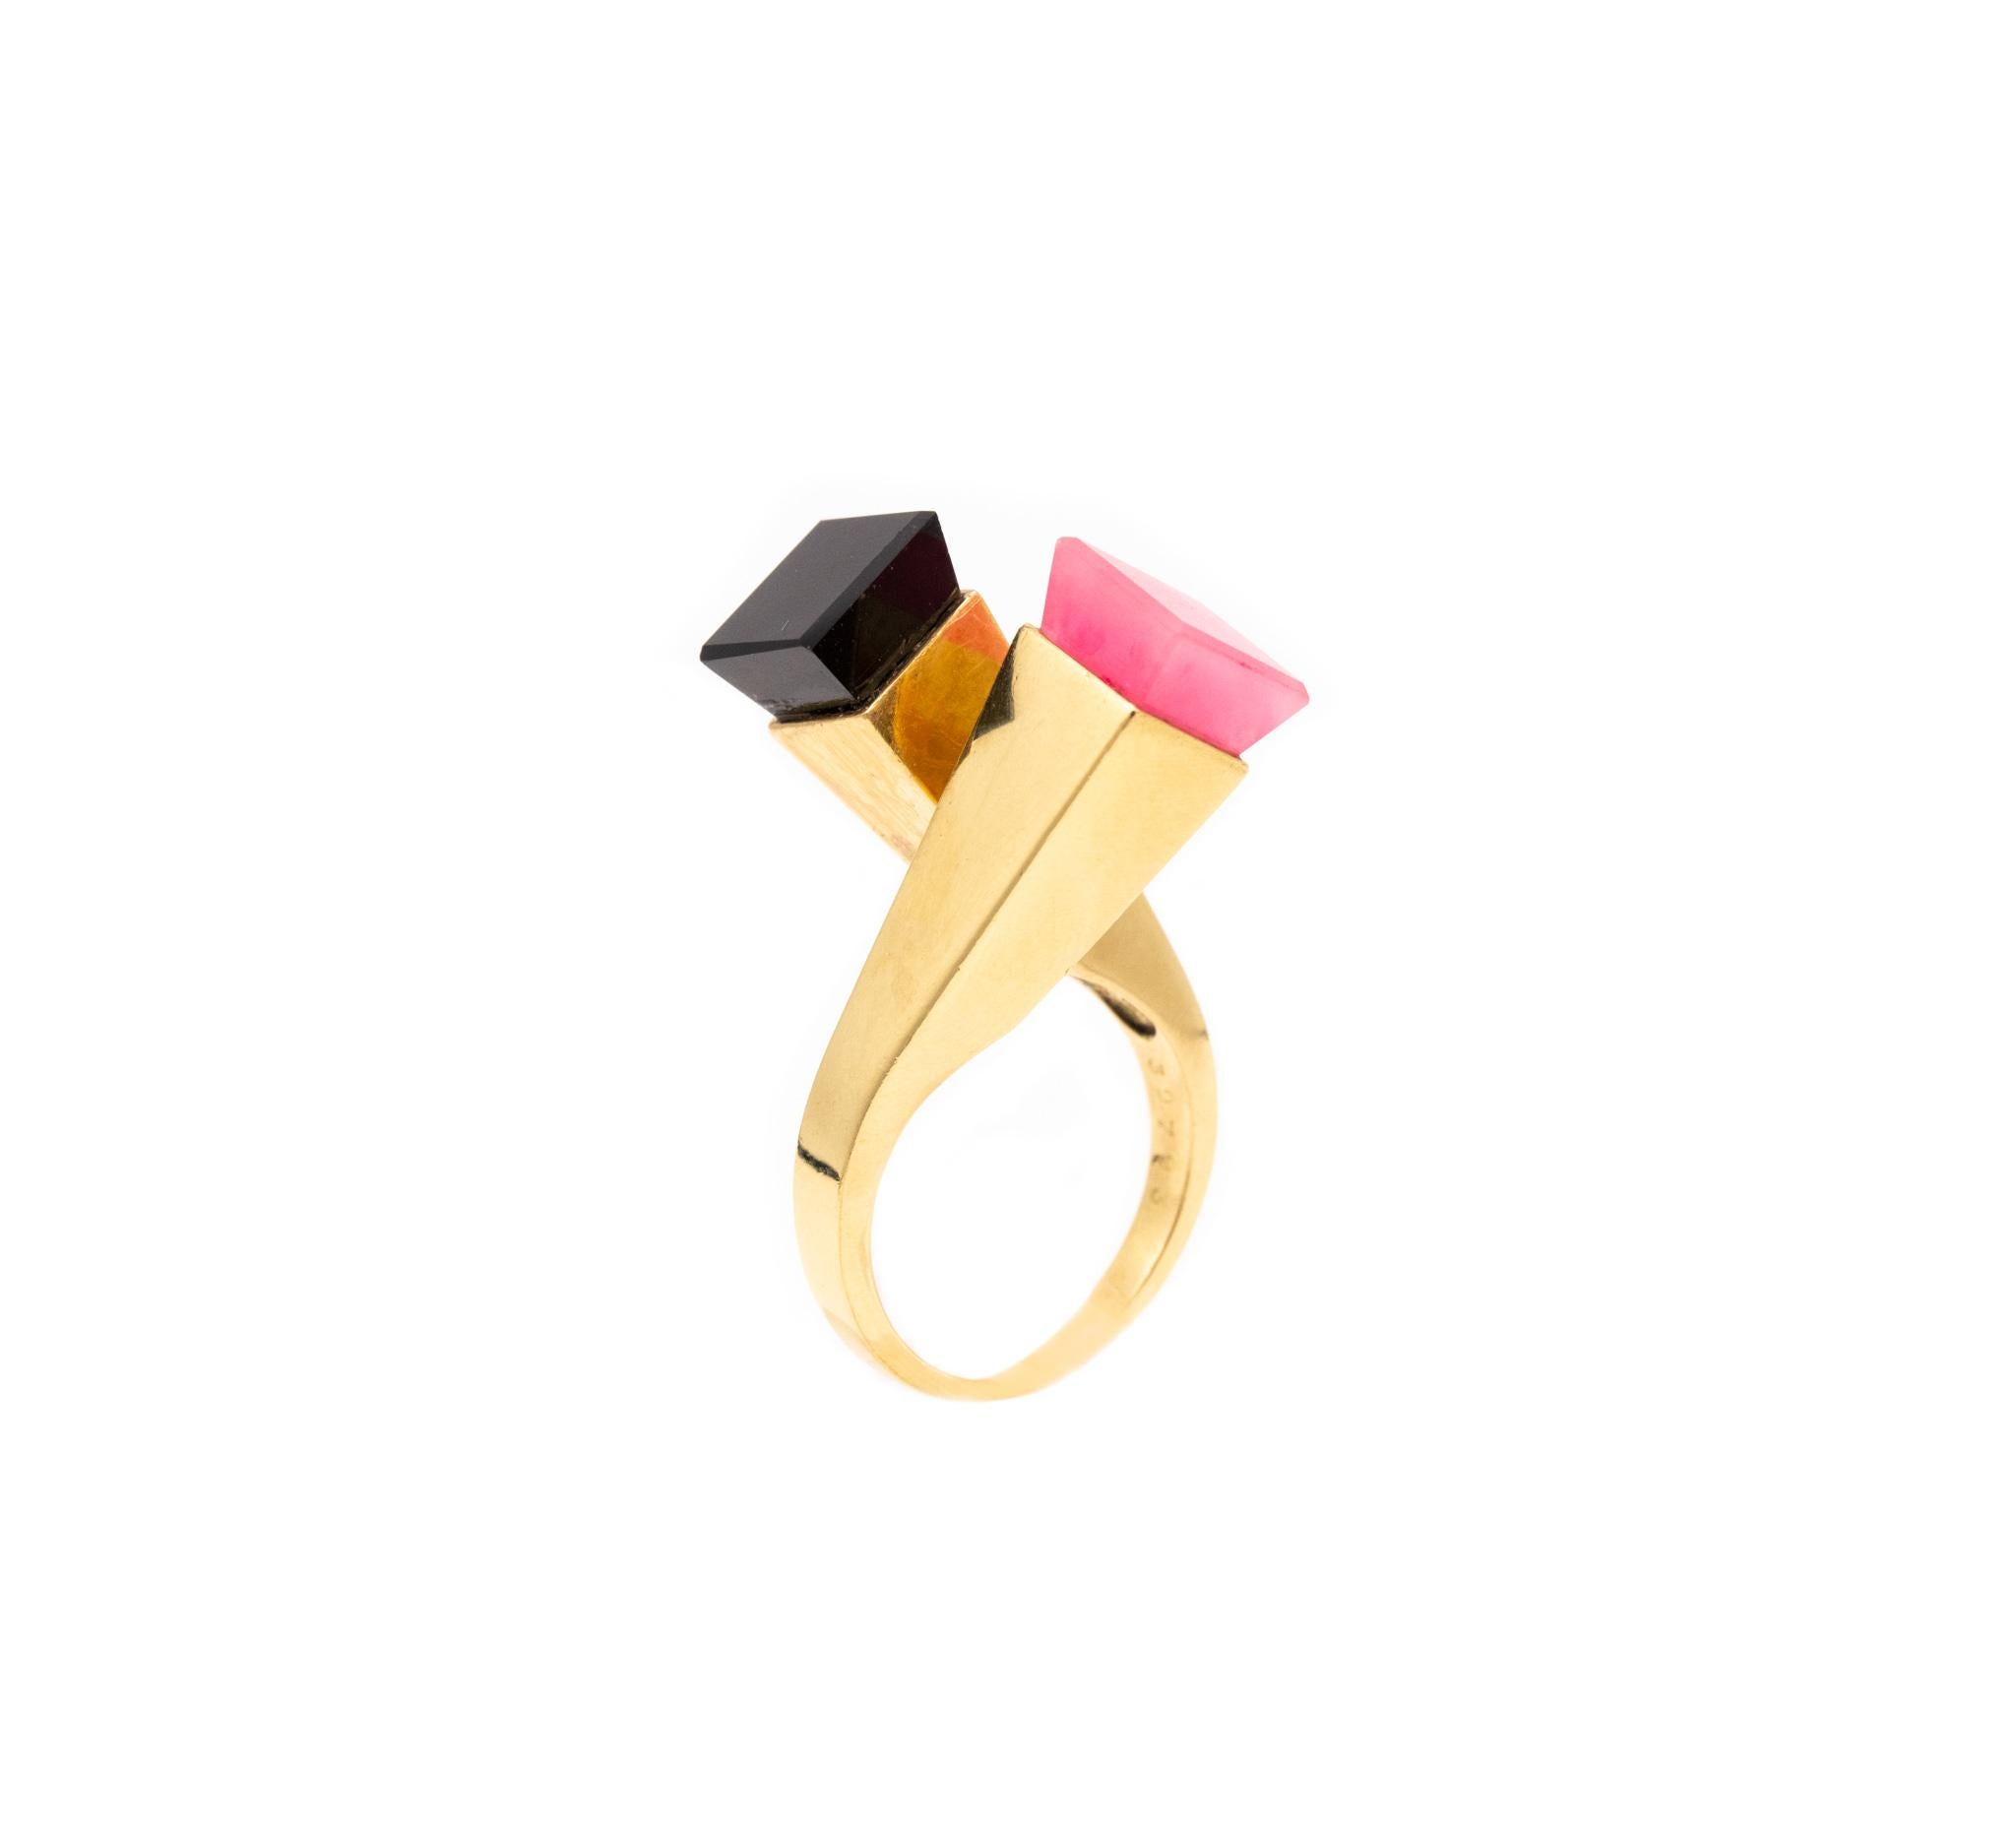 Beautiful geometric ring designed by Aldo Cipullo for Cartier.

A very rare vintage Toi et Moi by pass ring created by Aldo Cipullo in the 1970's during the collaboration period with the house of Cartier (1969-1975) as a designer.

It was crafted in